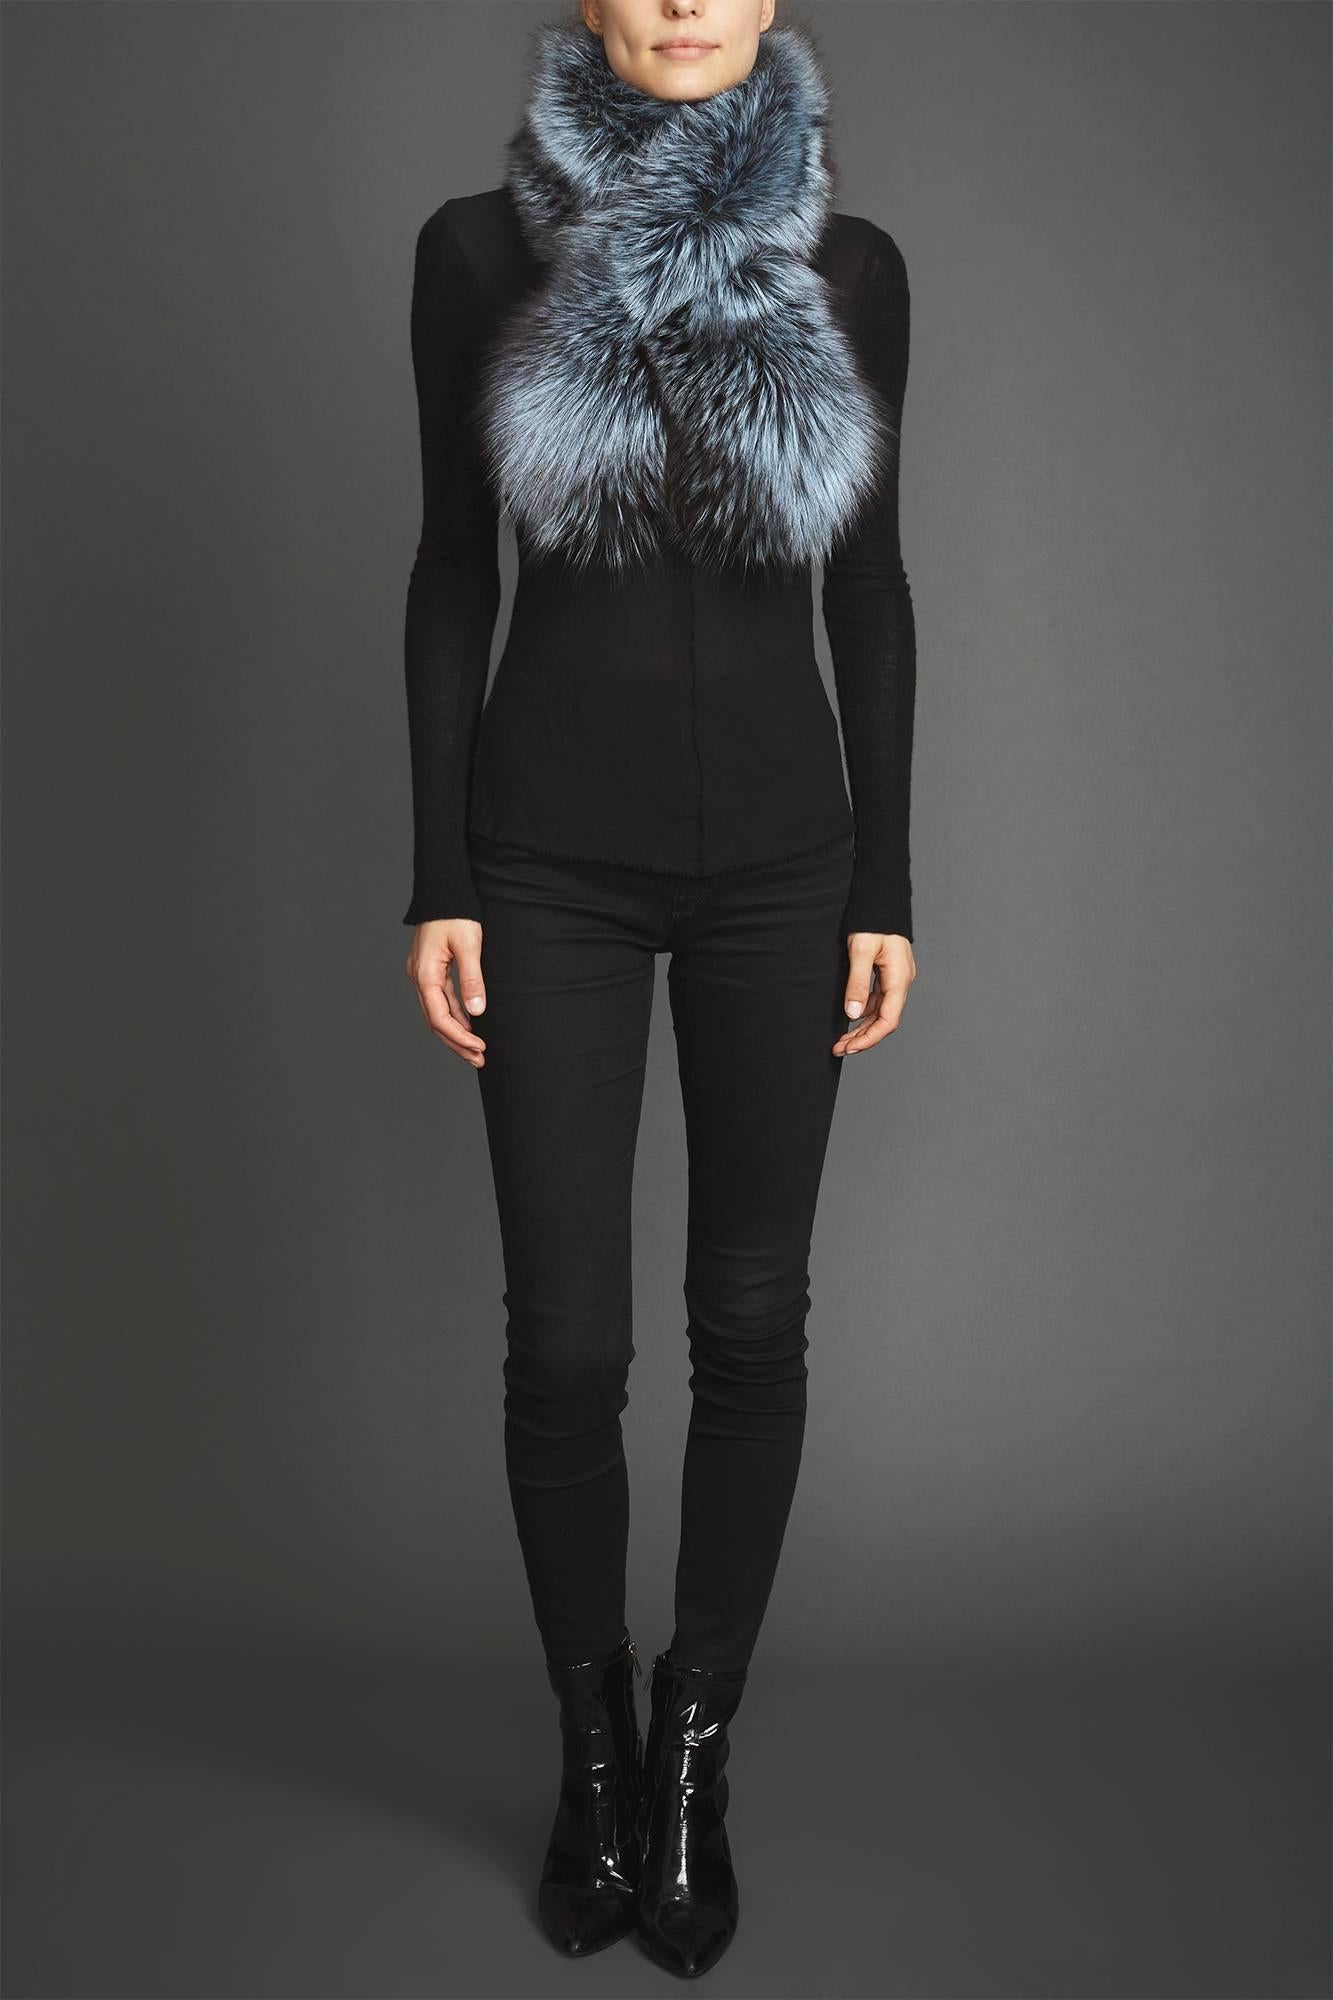 Verheyen Lapel Cross-through Collar in Iced Topaz Fox Fur 

The Lapel Cross-through Collar is Verheyen London’s casual everyday design, which is perfectly shaped to wear over any outfit. Designed for layering, this structured shape, crafted in the